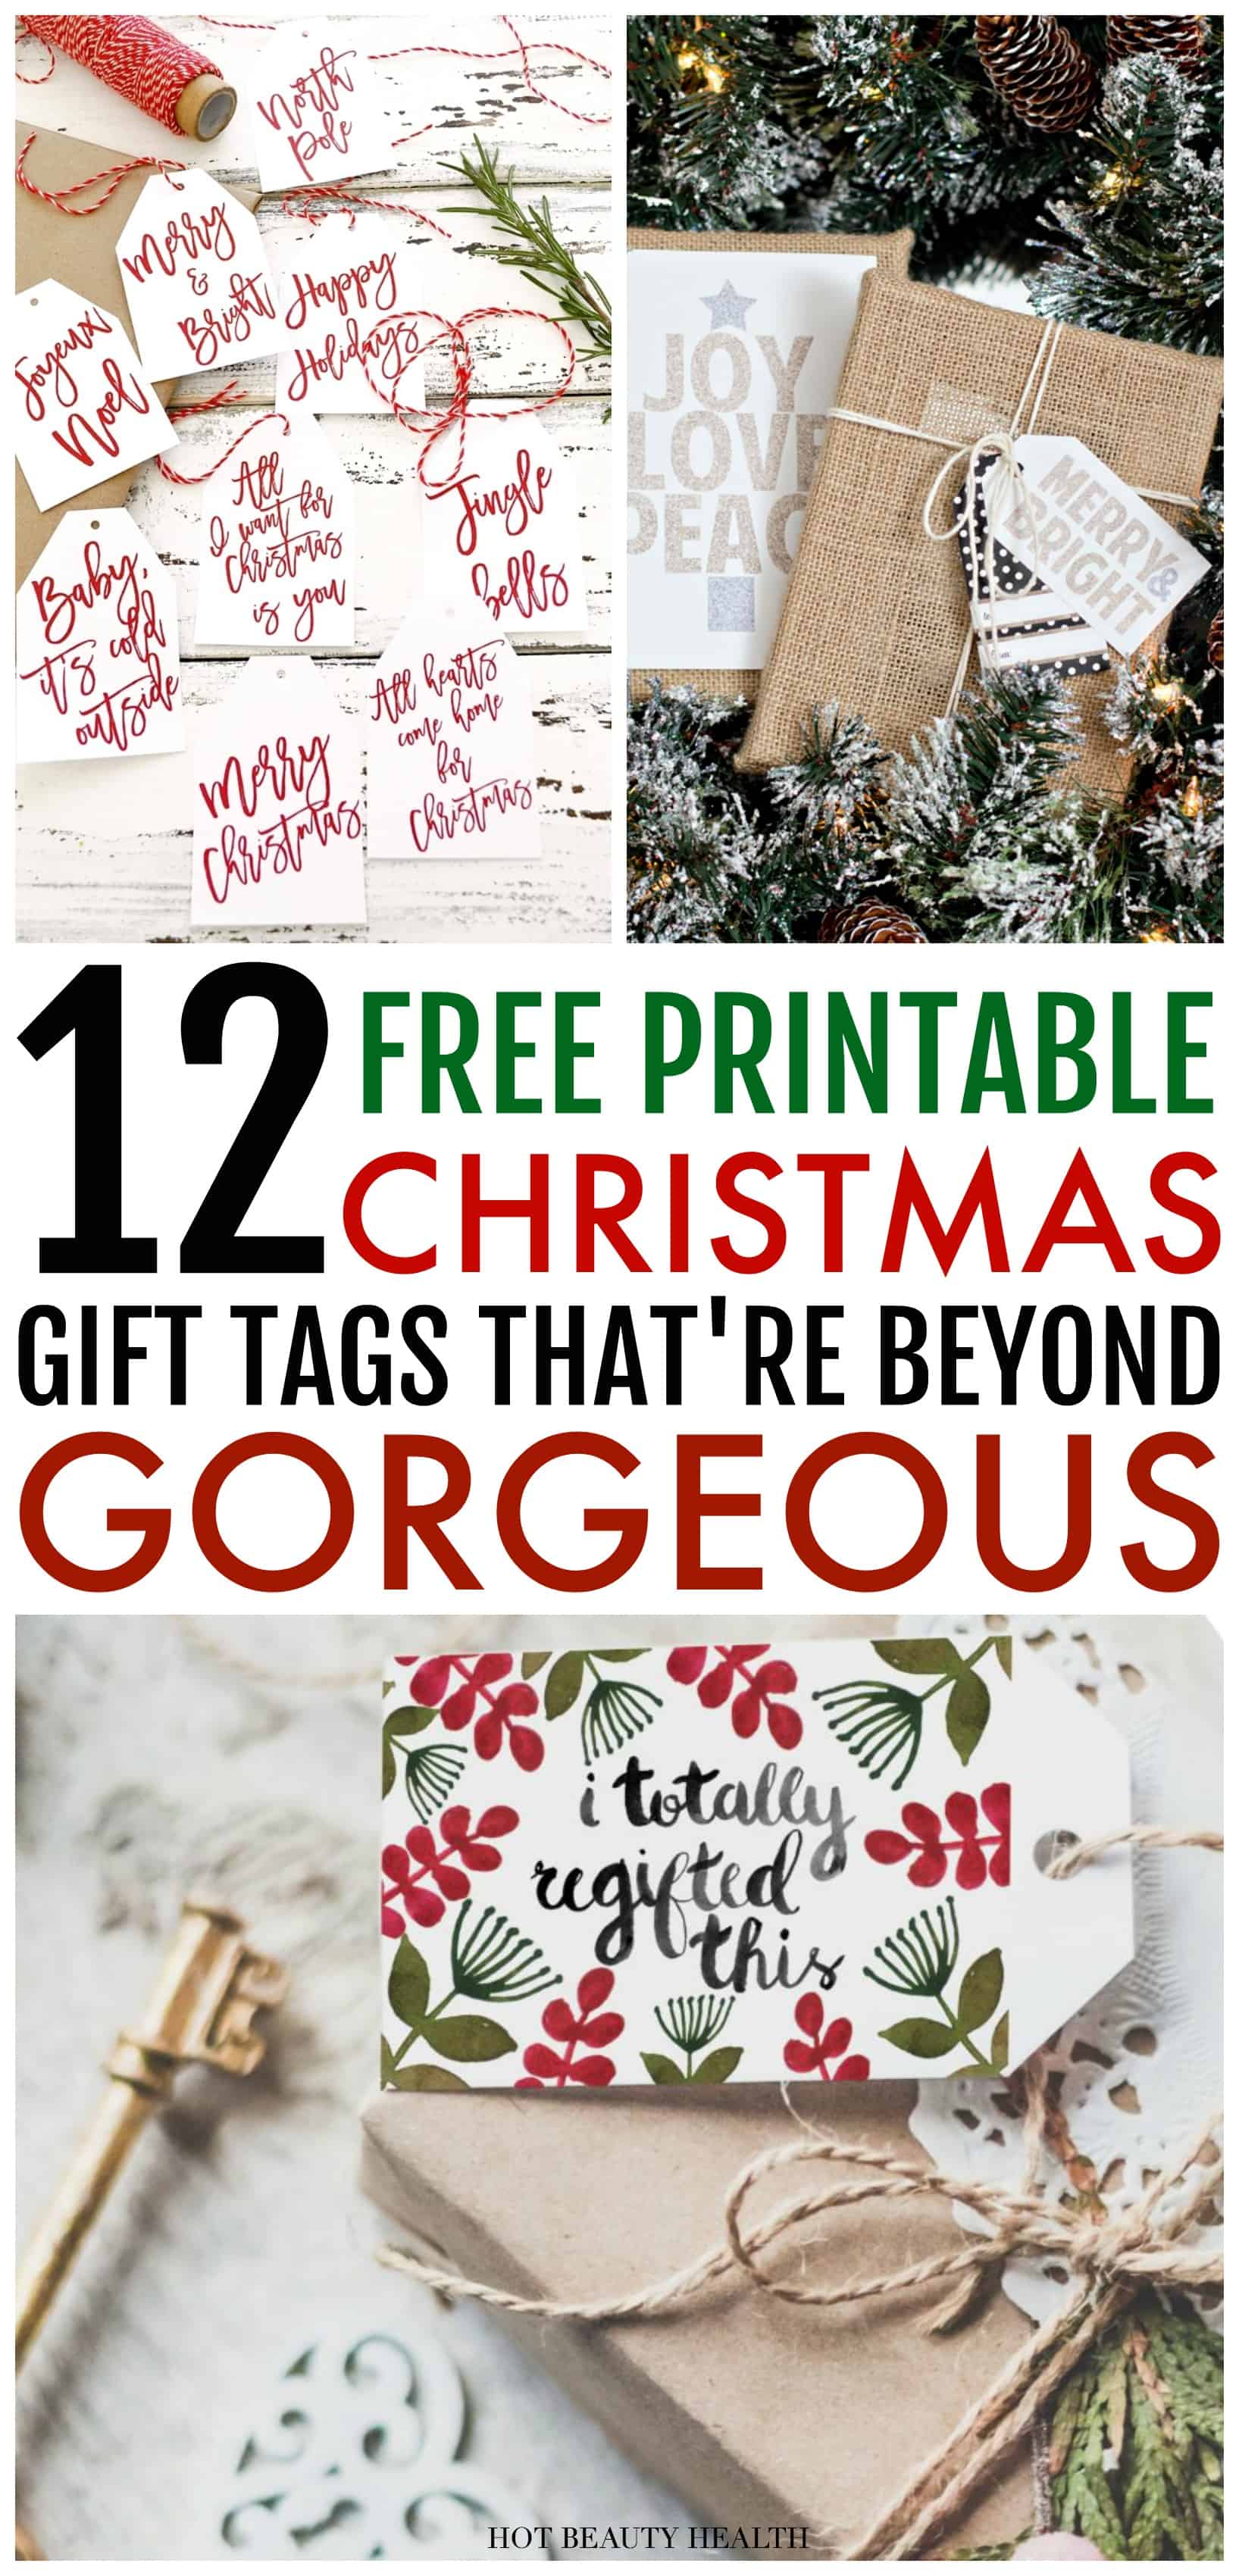 These 12 gorgeous free printable Christmas gift tags will wow your gift recipients this holiday season. From colorful to minimal to glam, you can just download, print and use these handmade gift tags on all your Christmas presents this year!